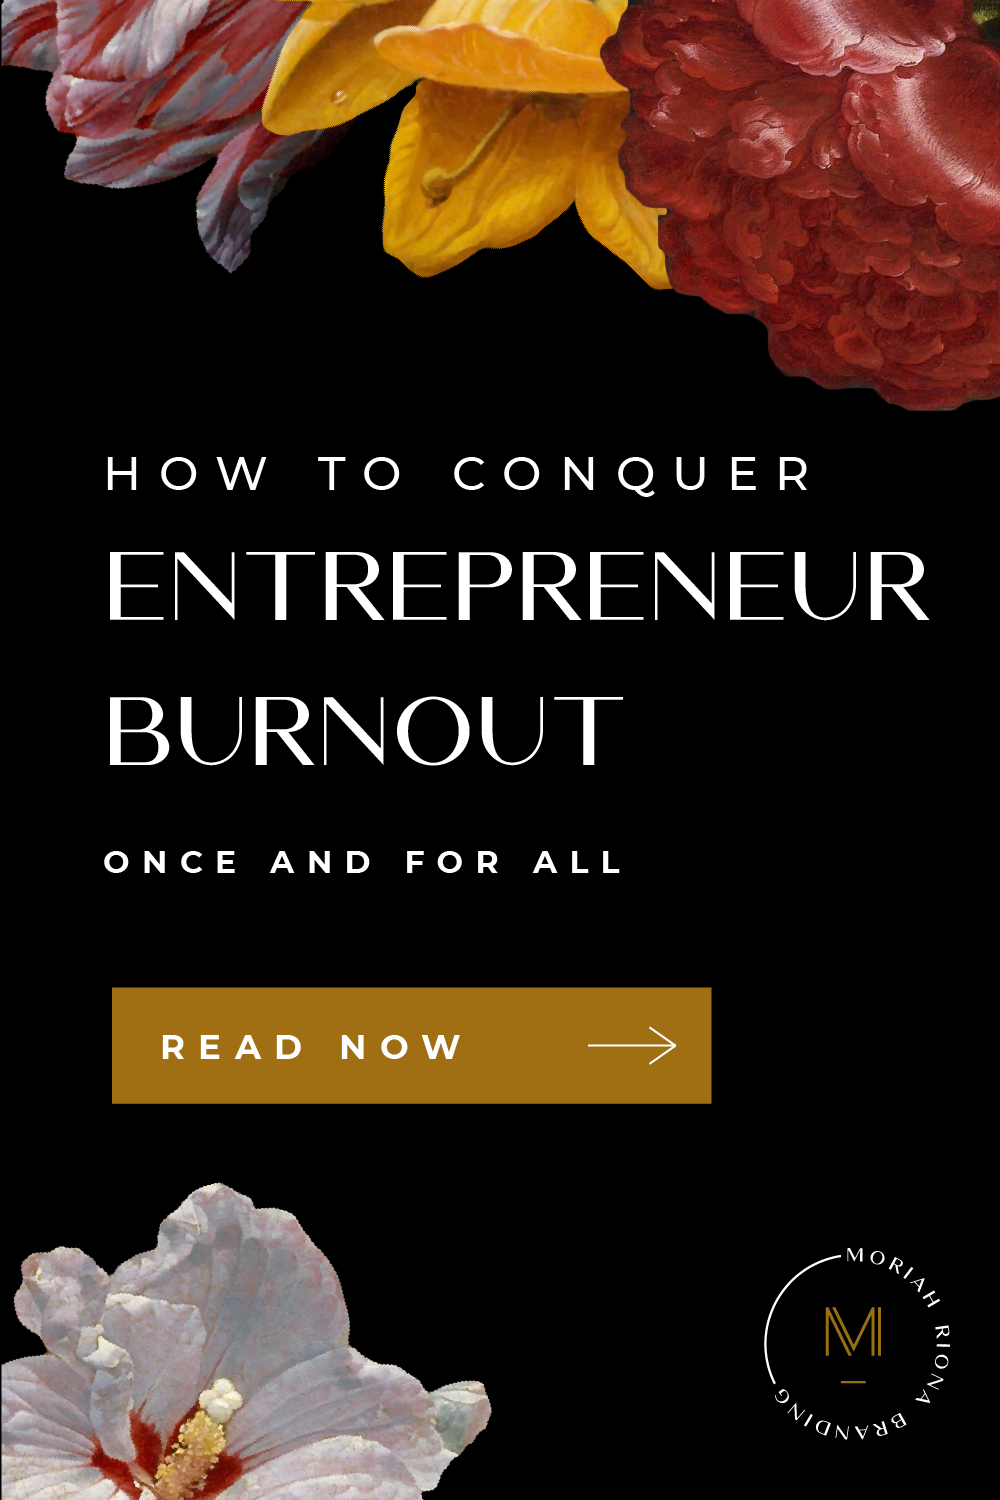 Want to hear how to conquer entrepreneur burnout? This blog post is for you! Discover how making small changes in your mindset and your habits can help you get motivated again. Learn how overcoming entrepreneur burnout is the key to creating a business that serves you, not the other way around. #entrepreneurship #entrepreneurmotivation #branding #luxurybrand